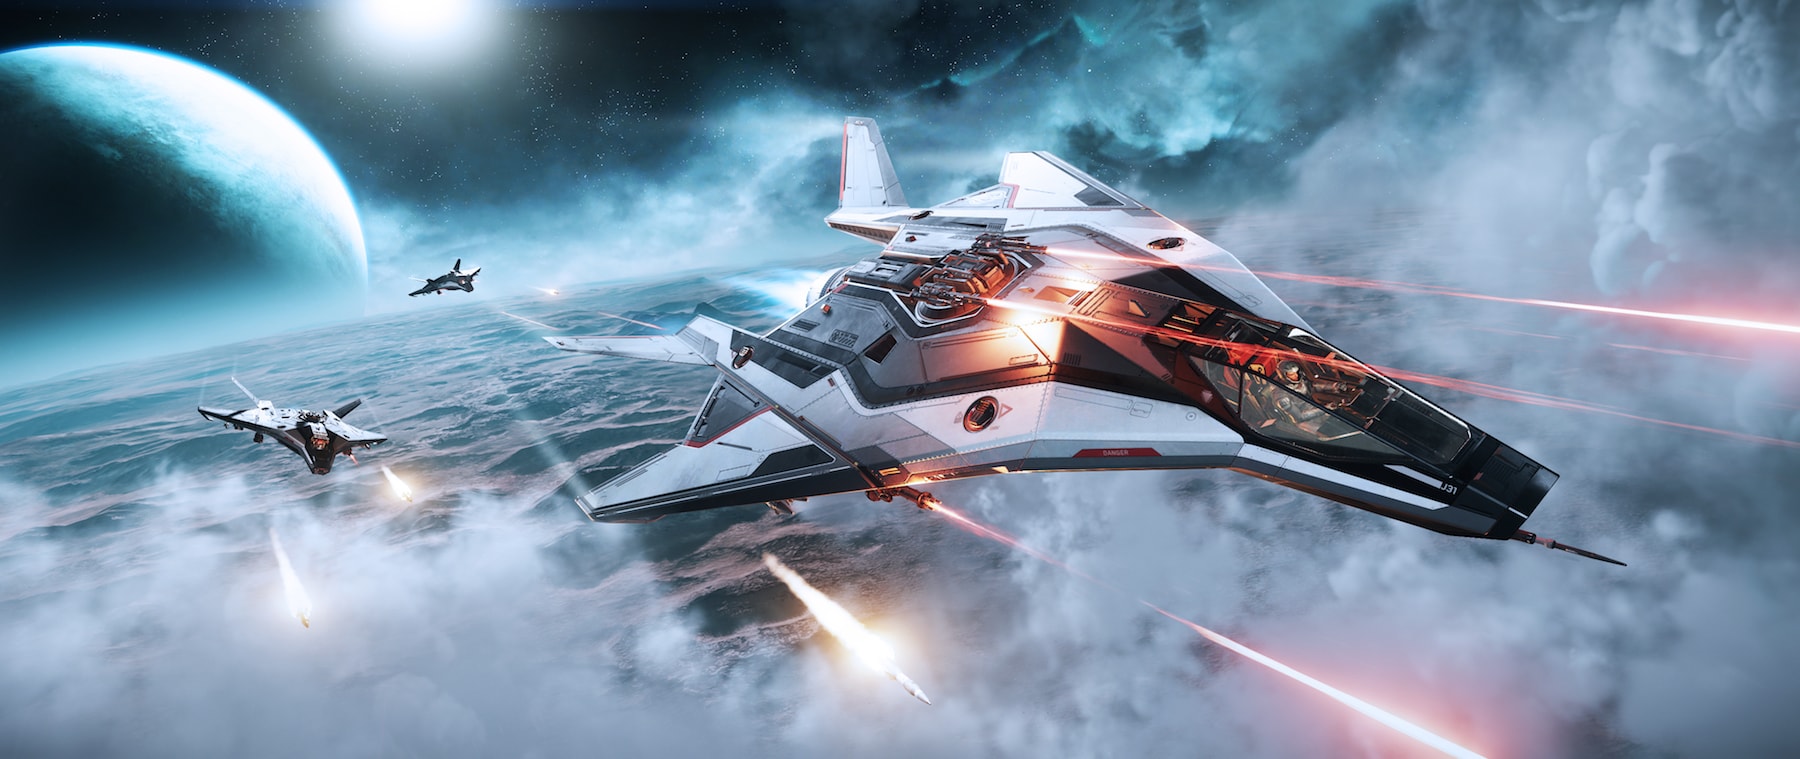 Star Citizen Gets New $675 Mine-Layer Ship With Features That Are Not